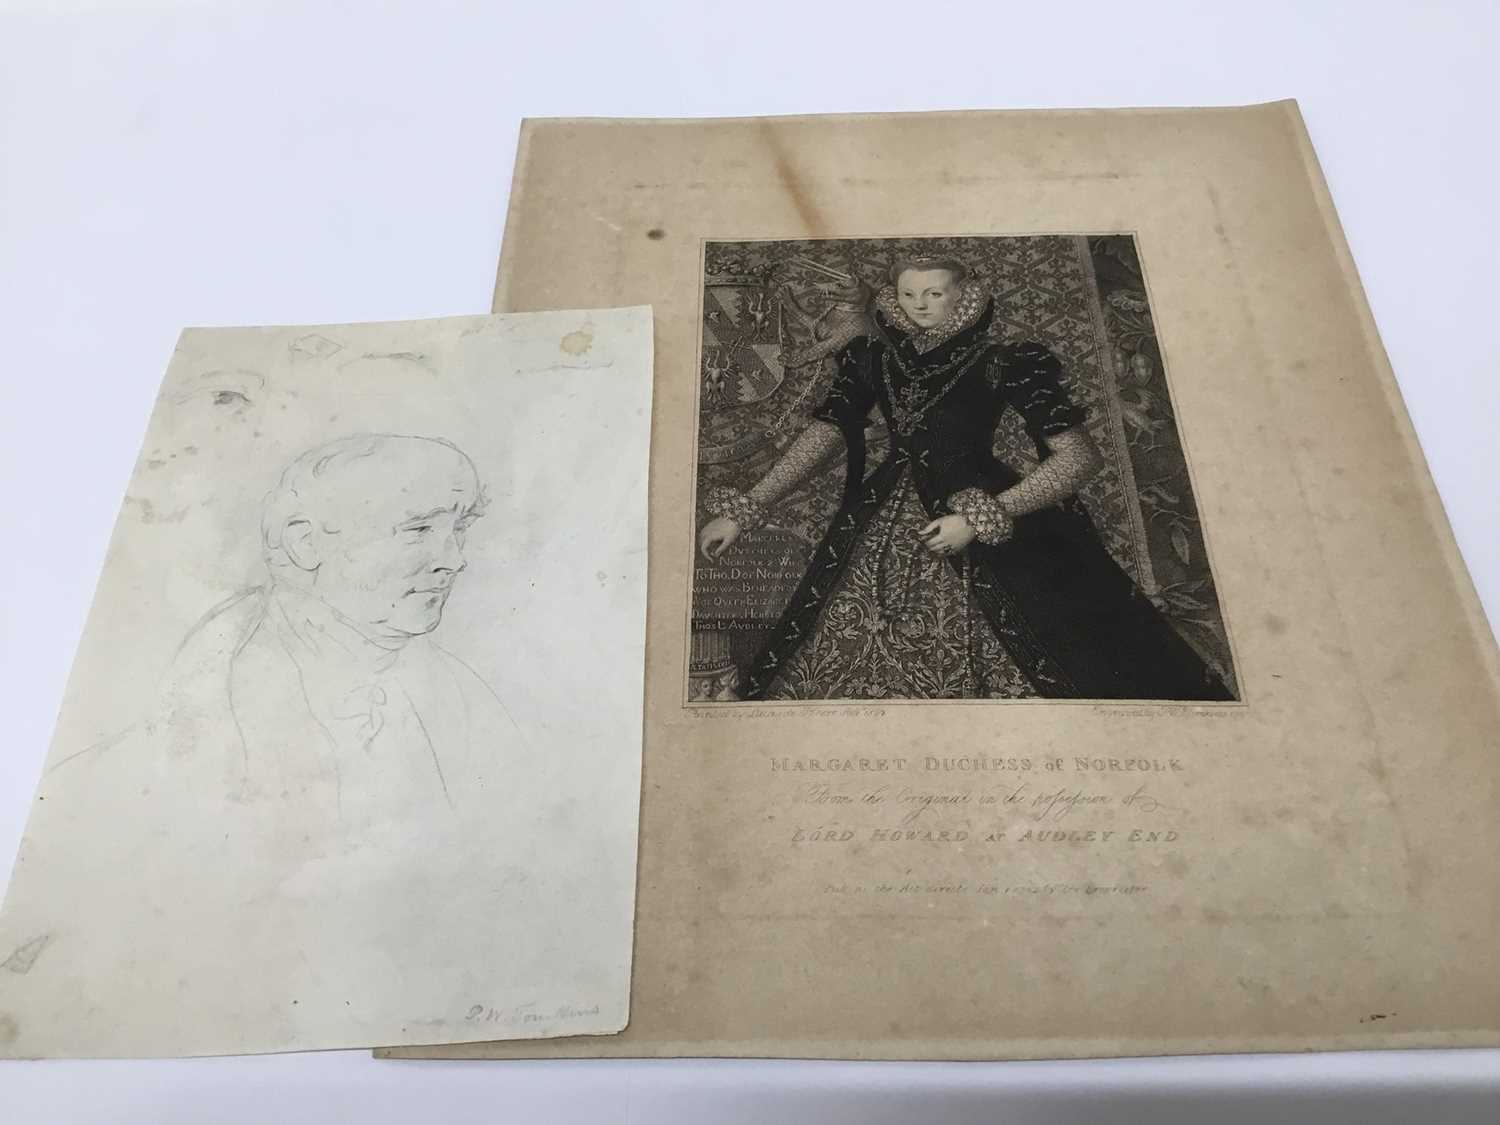 Lot 101 - Pettro William Tomkins (1760-1840) pencil, portrait of a Gentleman, and engraving Margaret Duchess of Norfolk